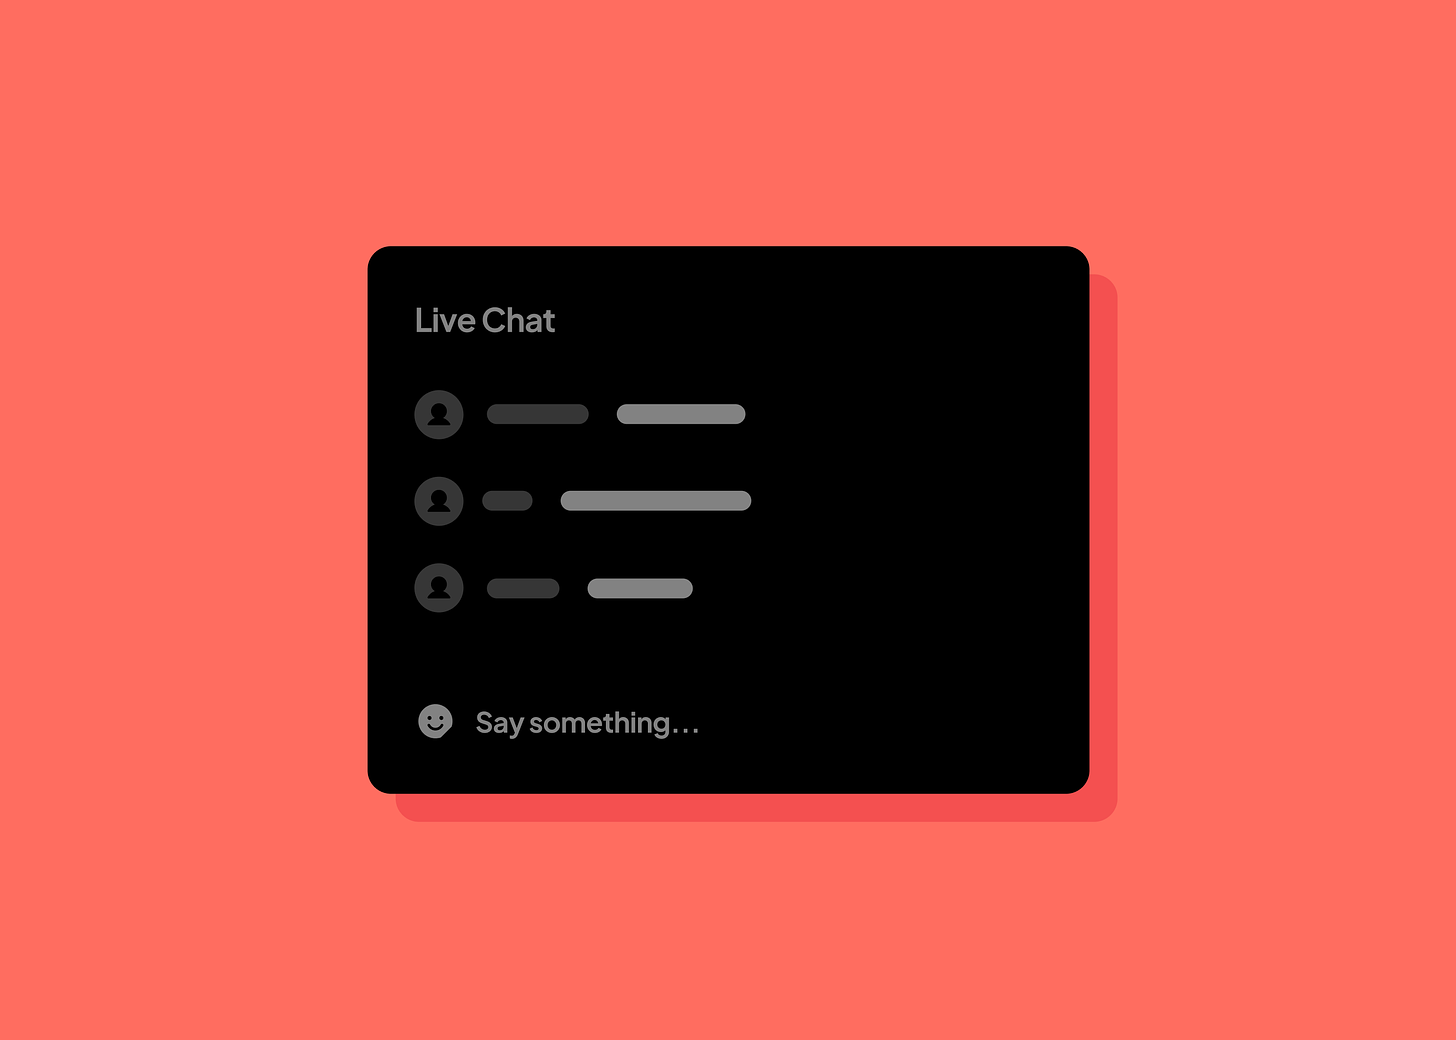 Illustration of YouTube Live Chat